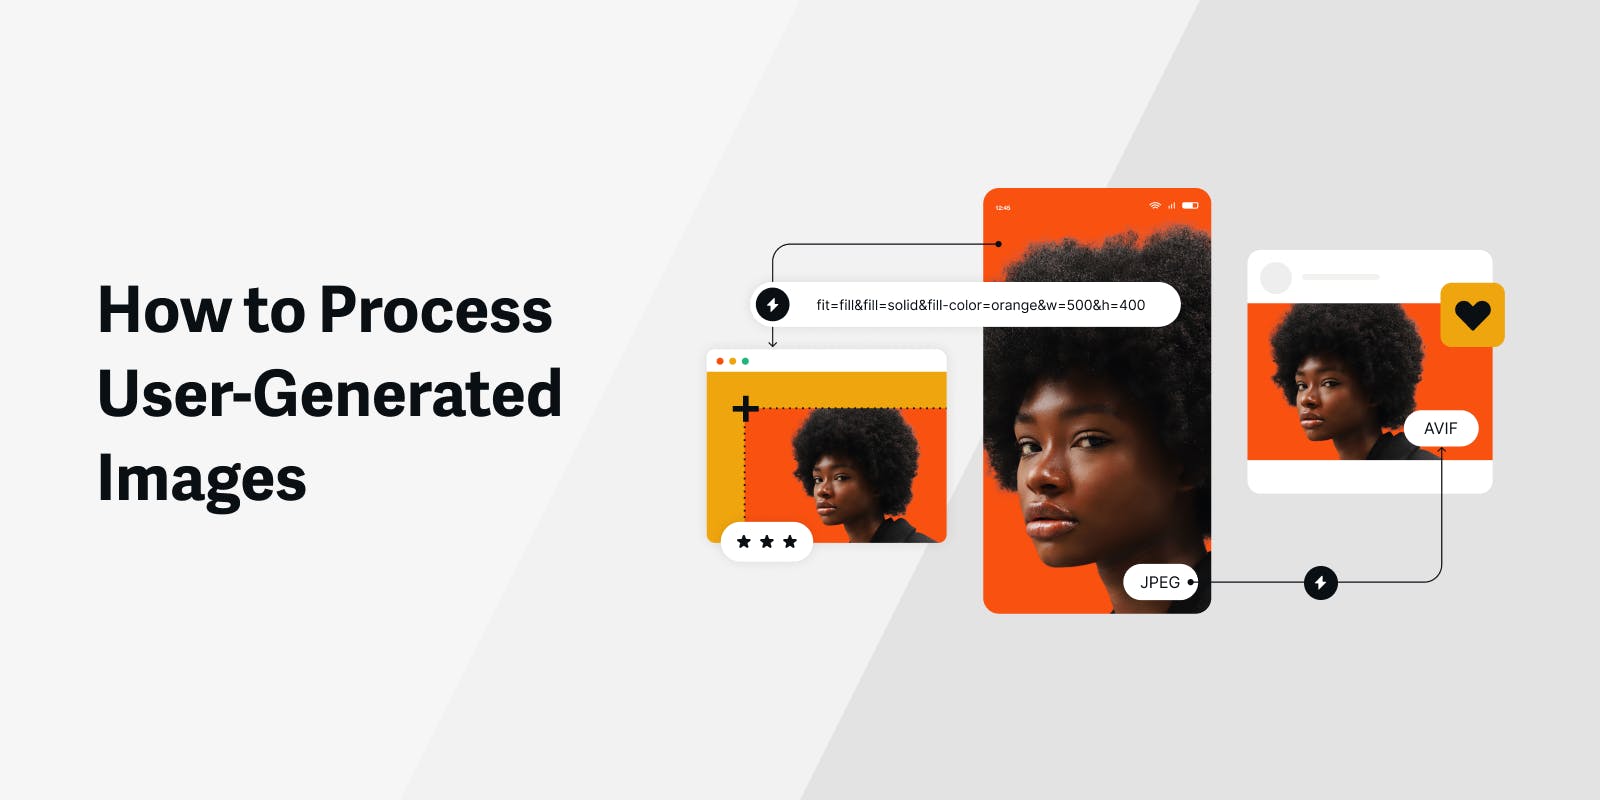 We’ll show you how to automatically optimize and standardize user-generated visual content for better web performance, design consistency, and credibility.